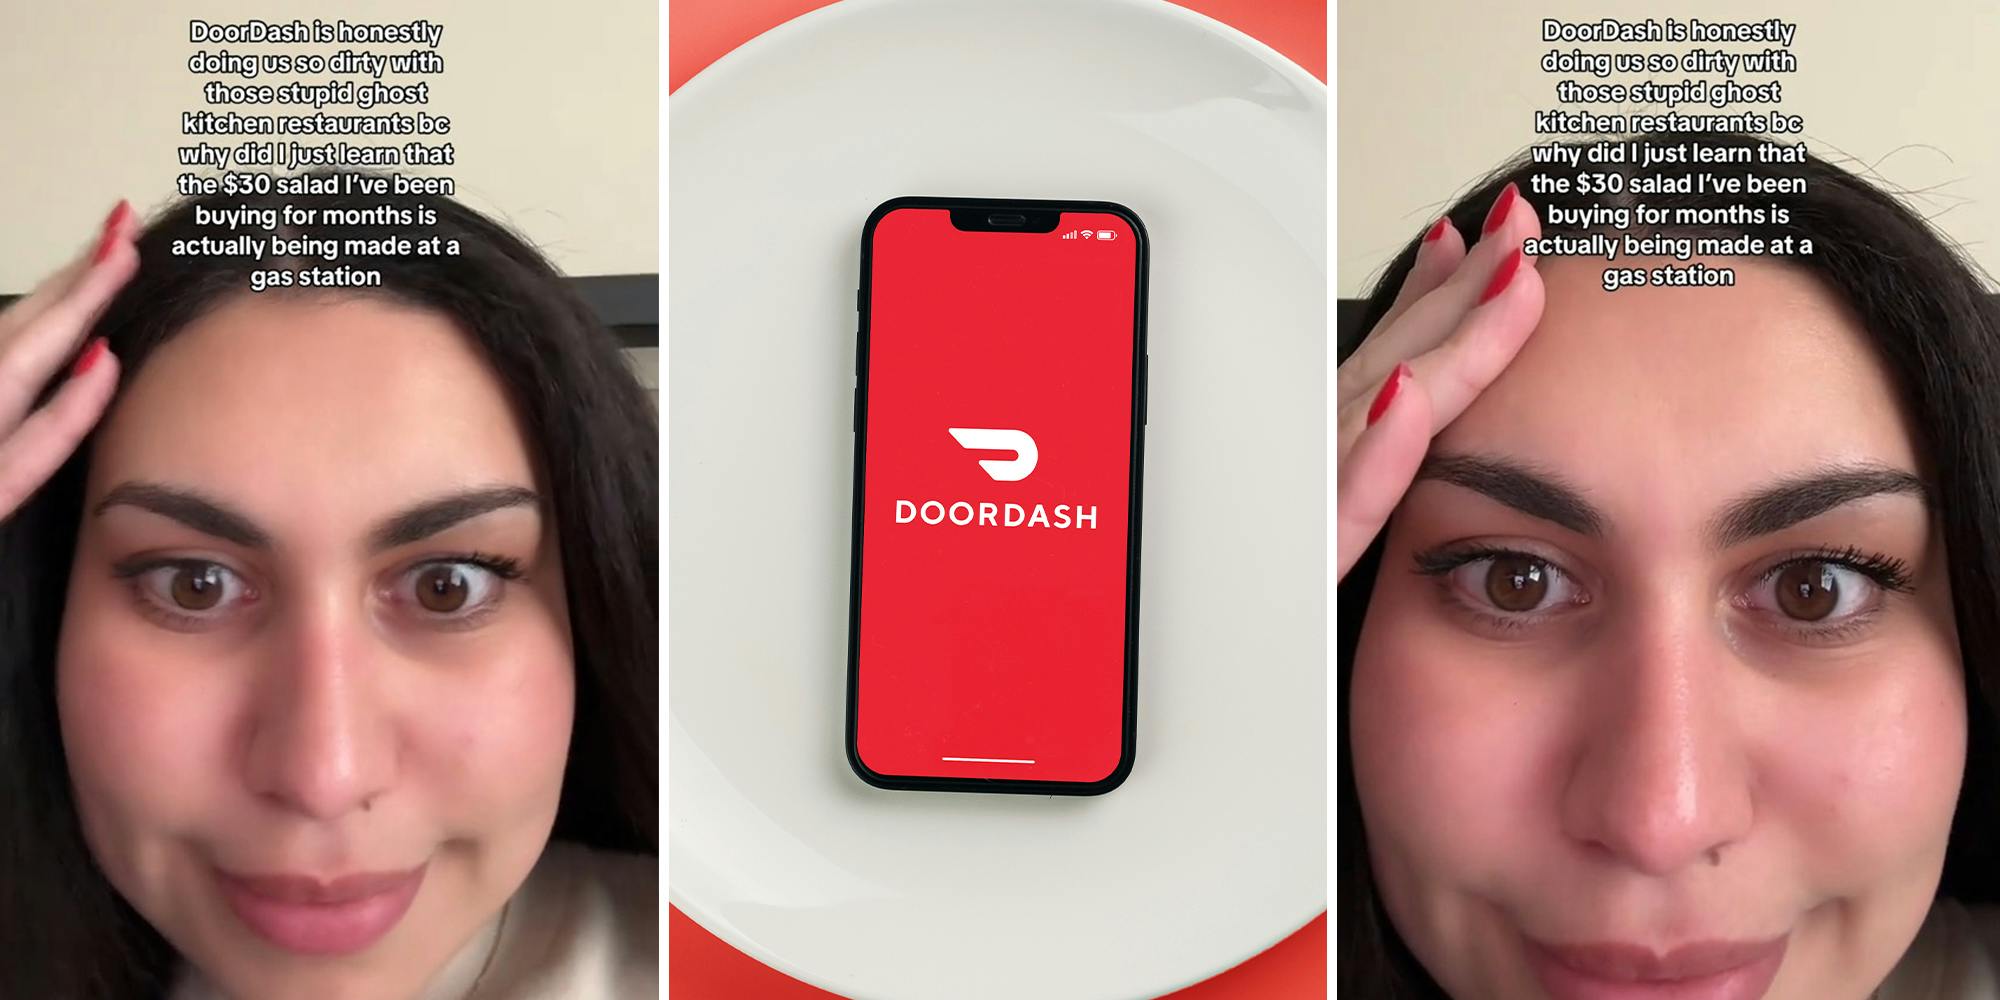 Woman slams DoorDash after learning where the $30 salad she’s been purchasing is actually made